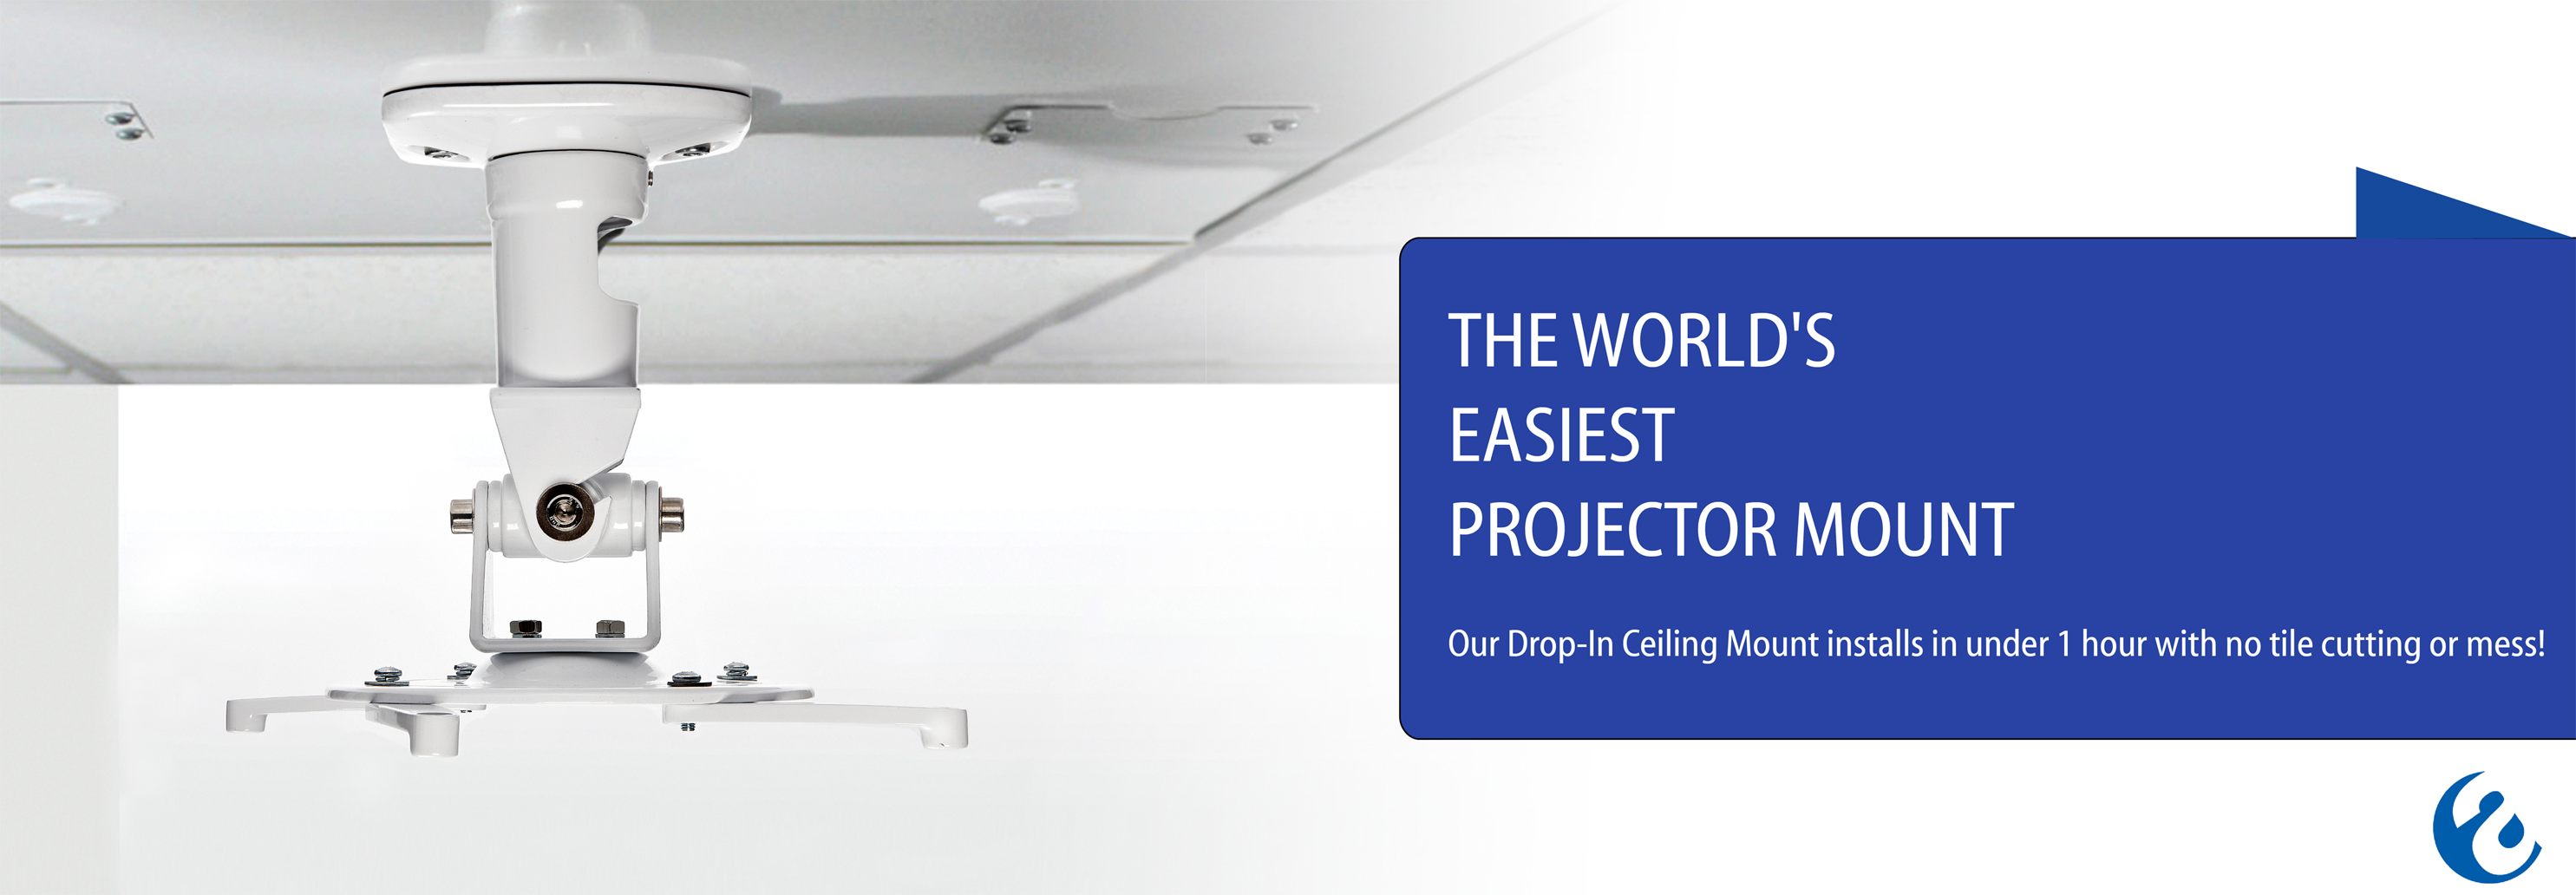 Amer Mounts Universal Drop Ceiling Projector Mount Replaces A 2 X2 Ceiling Tile Holds Up To 30 Lbs